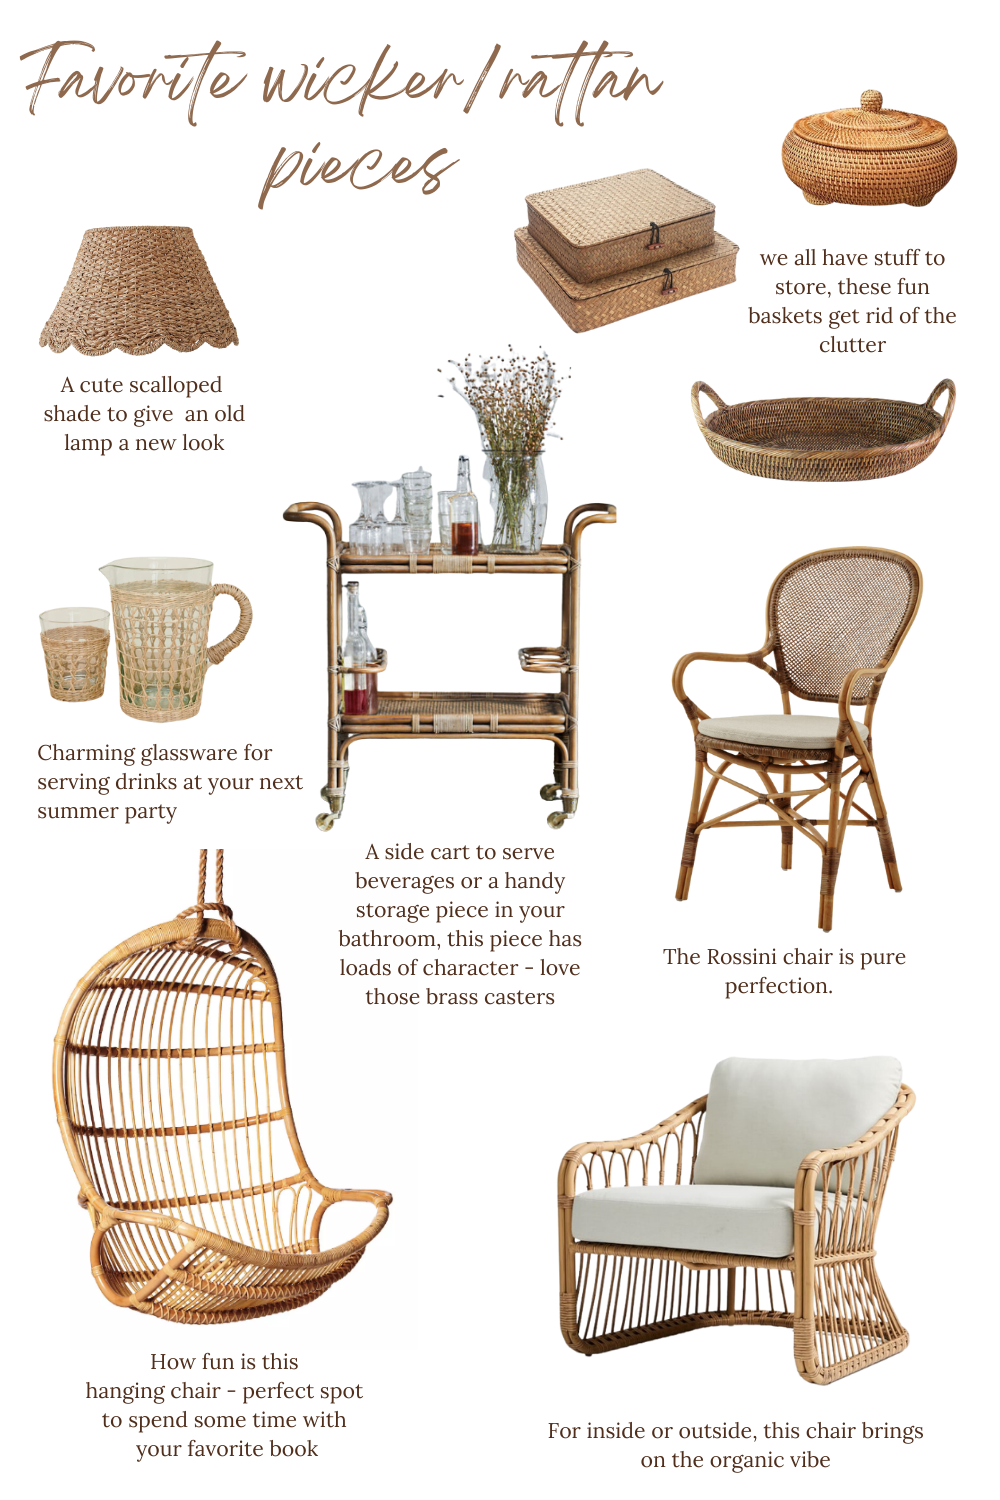 A collage of a beautiful outdoor patio featuring rattan furniture, including a cozy rattan chair with plush cushions, a bar cart, and woven lamp shade. The rattan furniture adds warmth and texture to the space, creating a inviting and stylish outdoor oasis